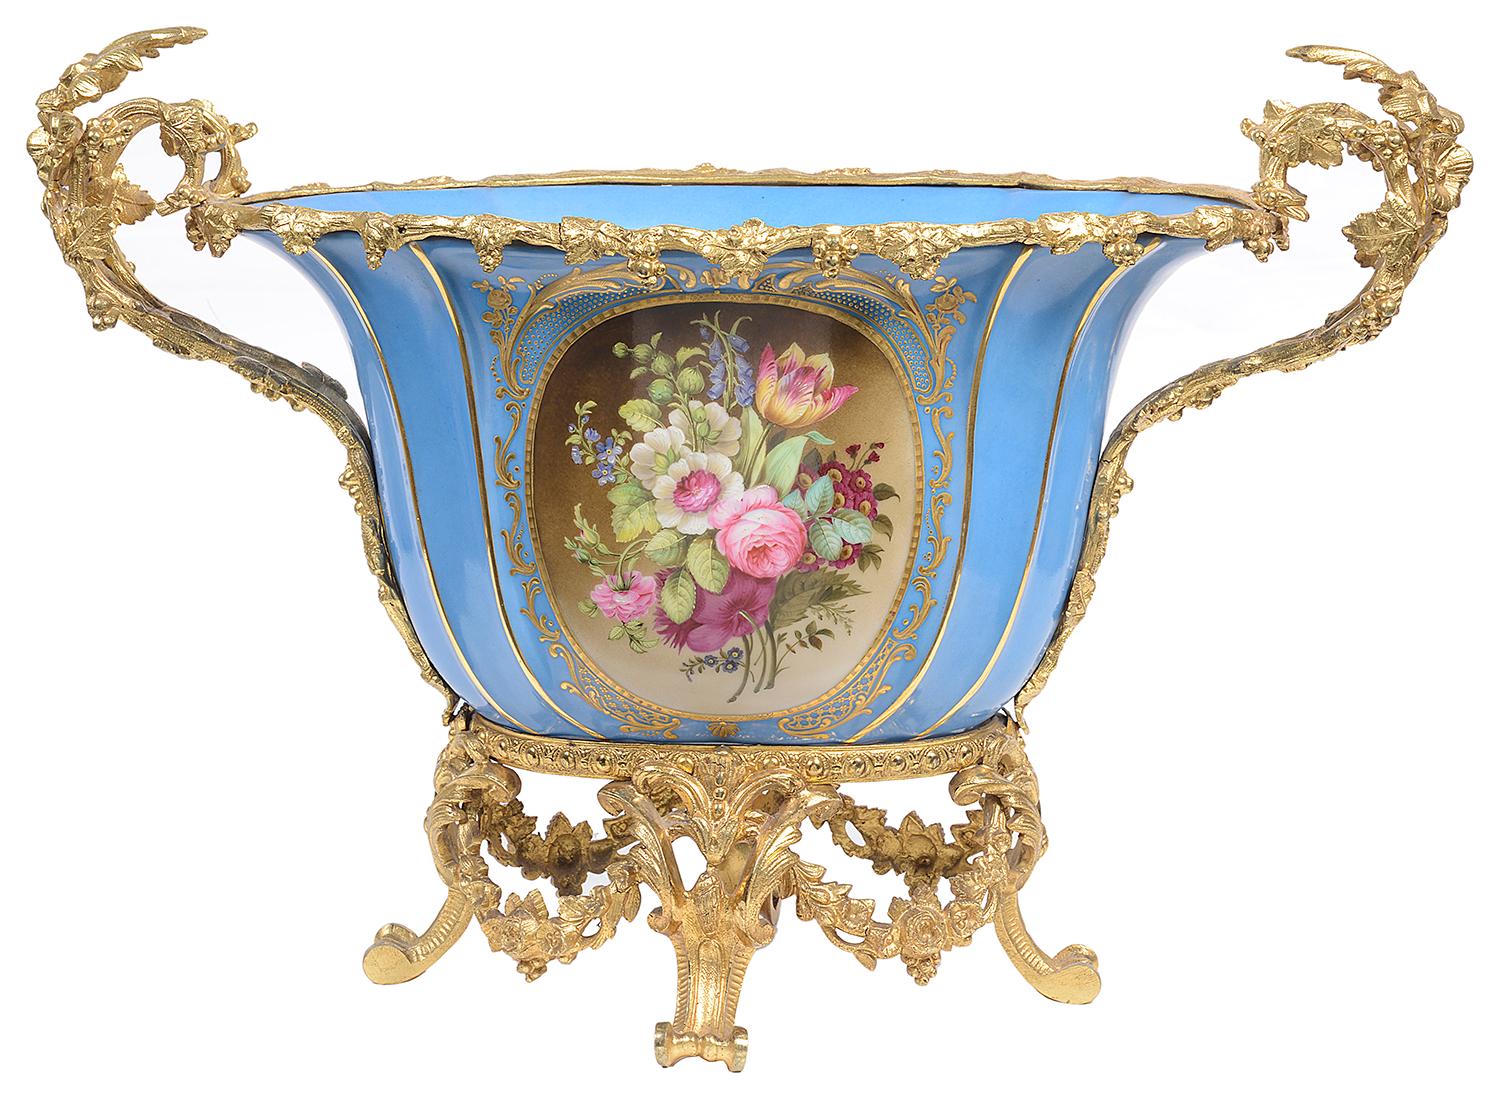 A good quality French 19th century 'Sevres' style porcelain and gilded ormolu jardinière, the handles to either side and rim of grape vine form, the fluted porcelain bowl with gilded decoration, oval inset painted panels with colourful flowers,